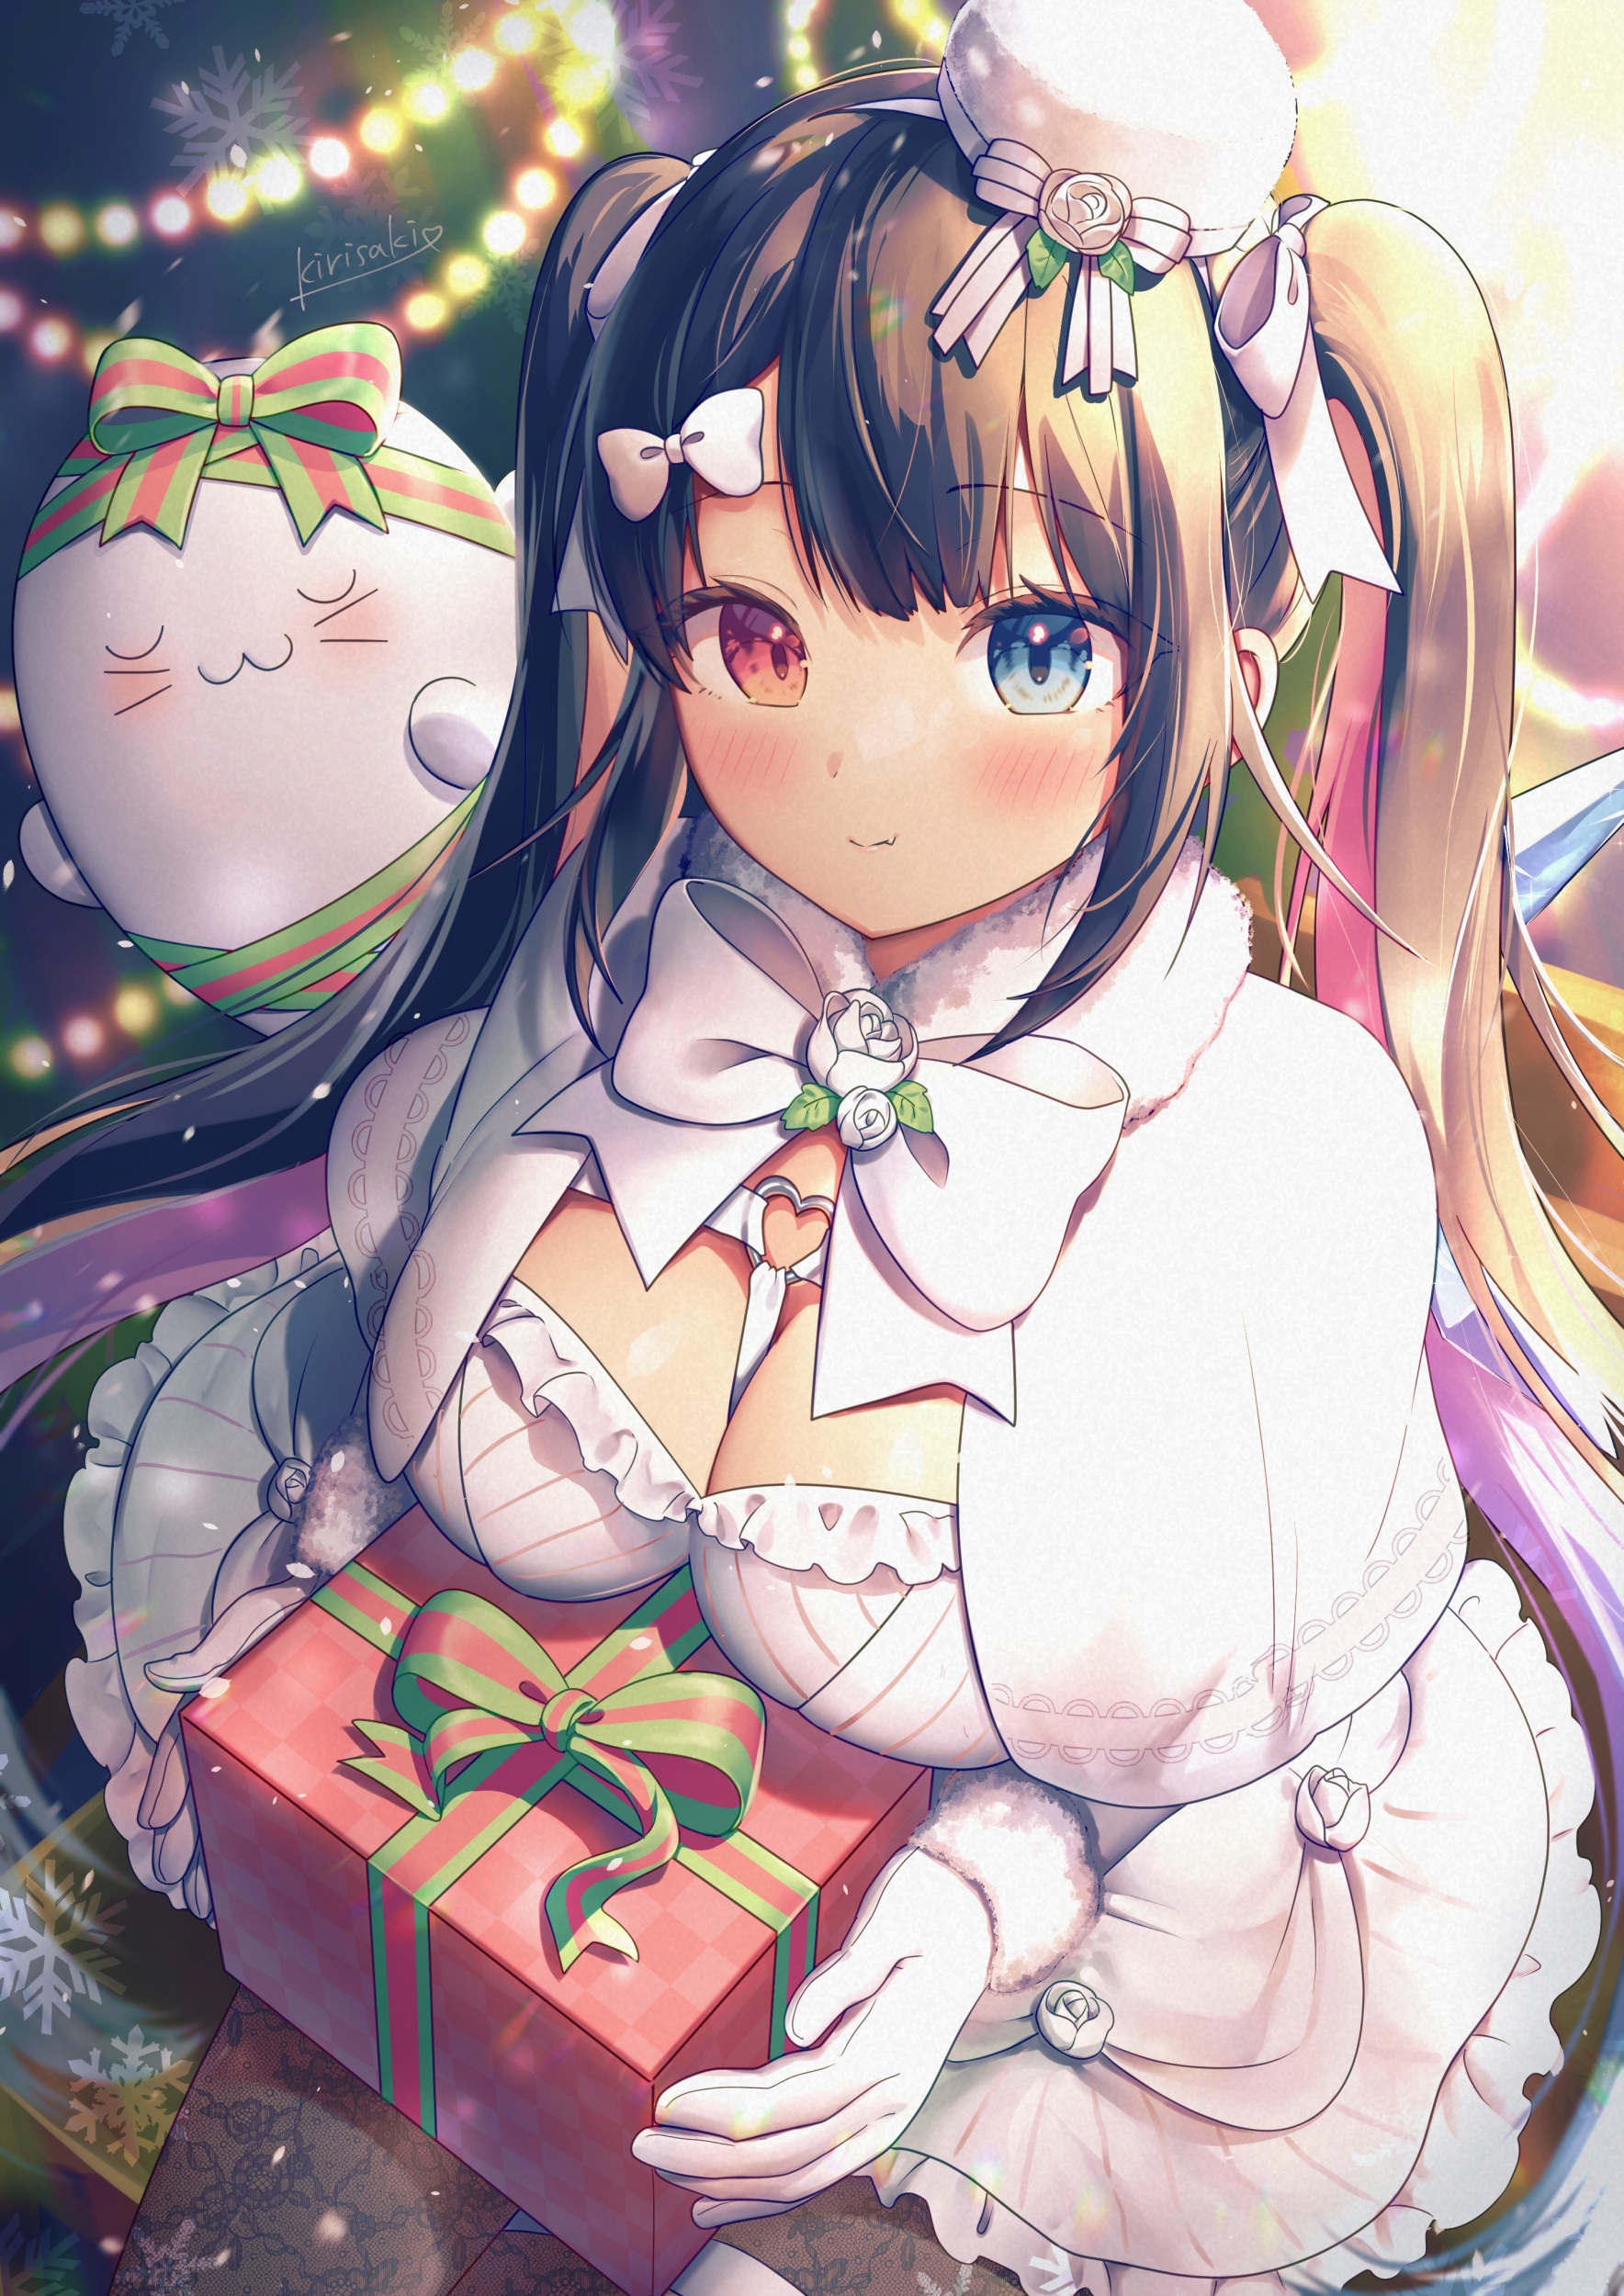 Anime 1768x2500 anime anime girls portrait display heterochromia Christmas presents Christmas tree Christmas blushing twintails big boobs bow tie gloves long hair cleavage hat two eye colors white clothing